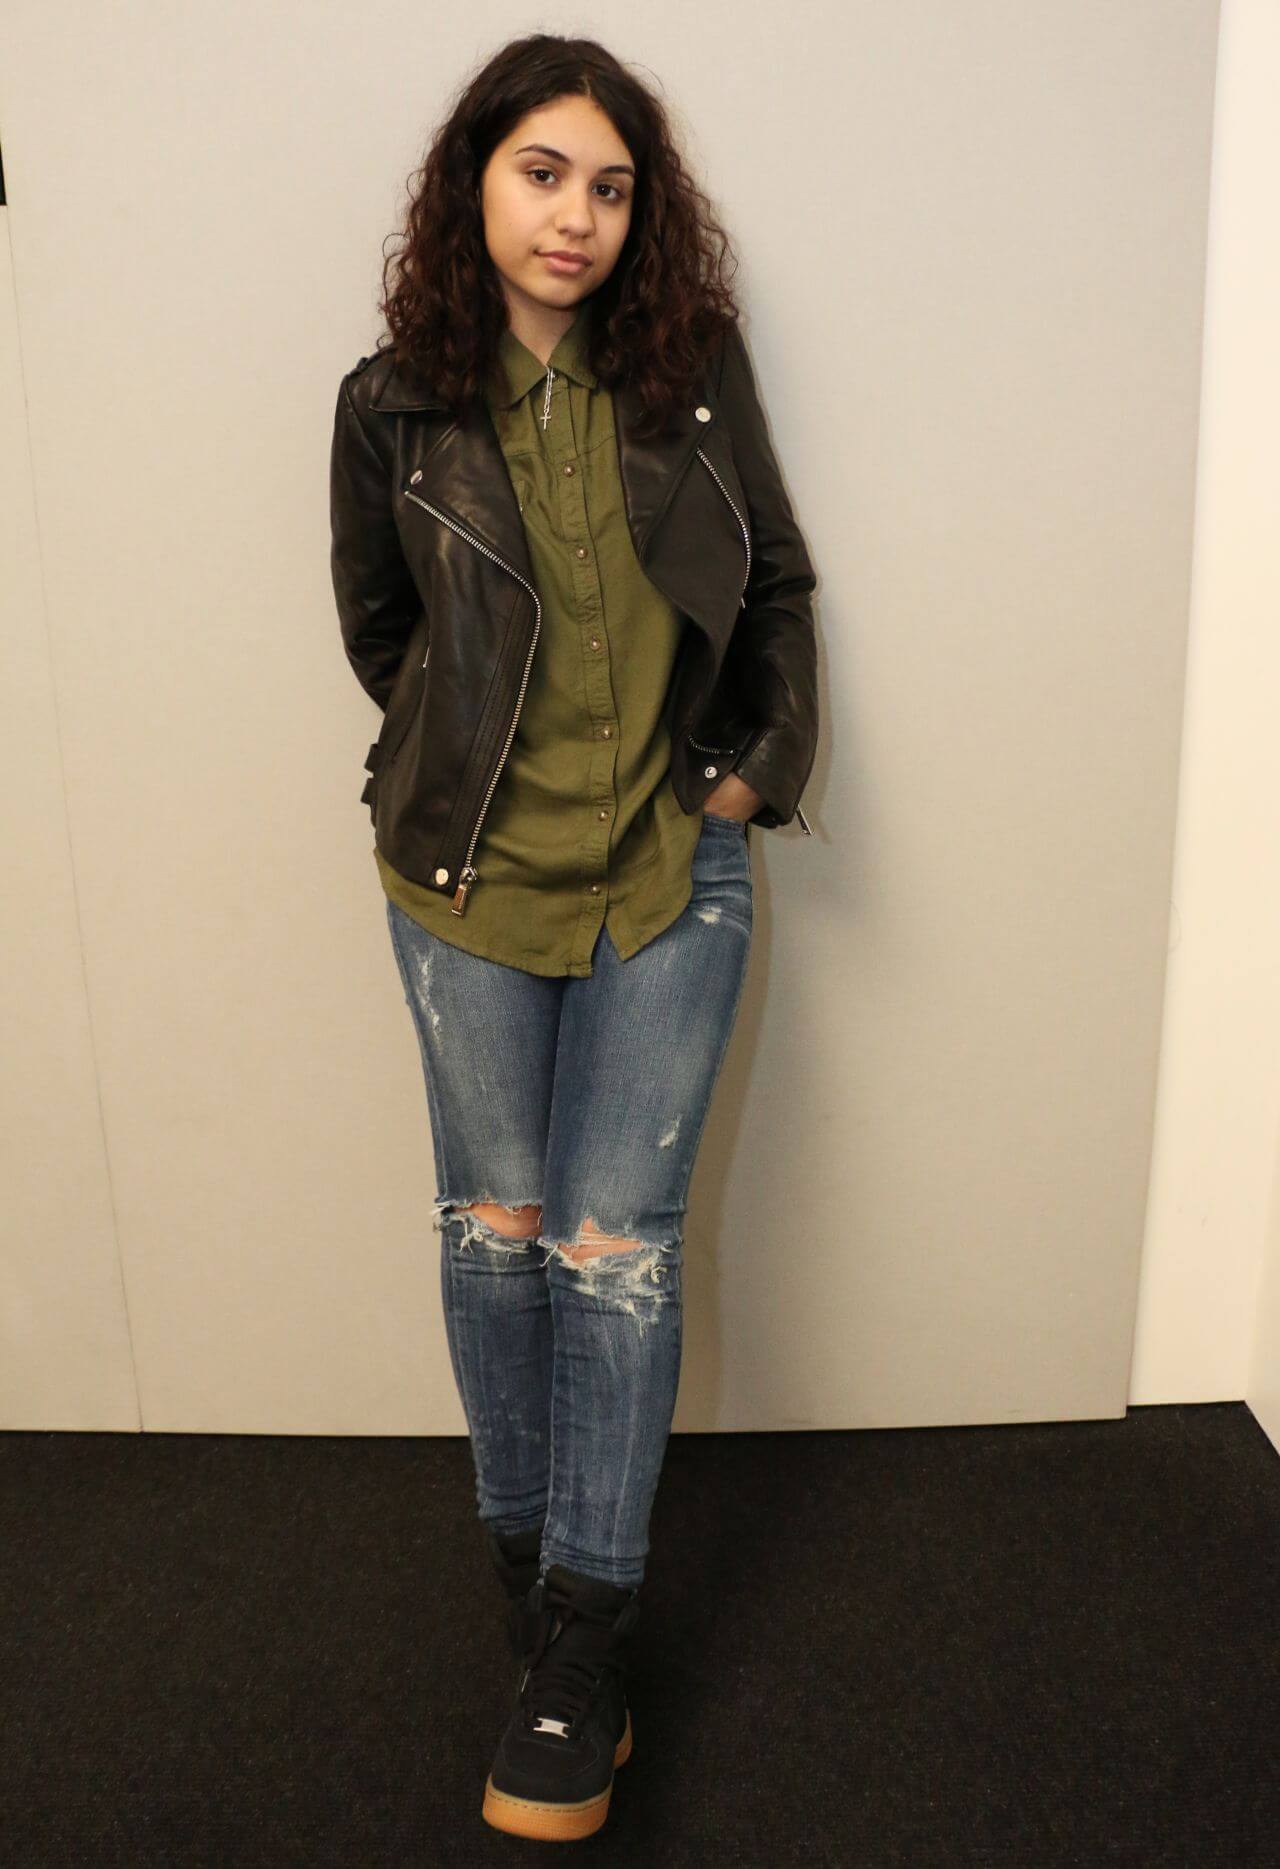 Alessia Cara –In Leather Jacket With Shirt & Ripped Jeans Backstage Before Her Performance at the Soho Apple Store in New York